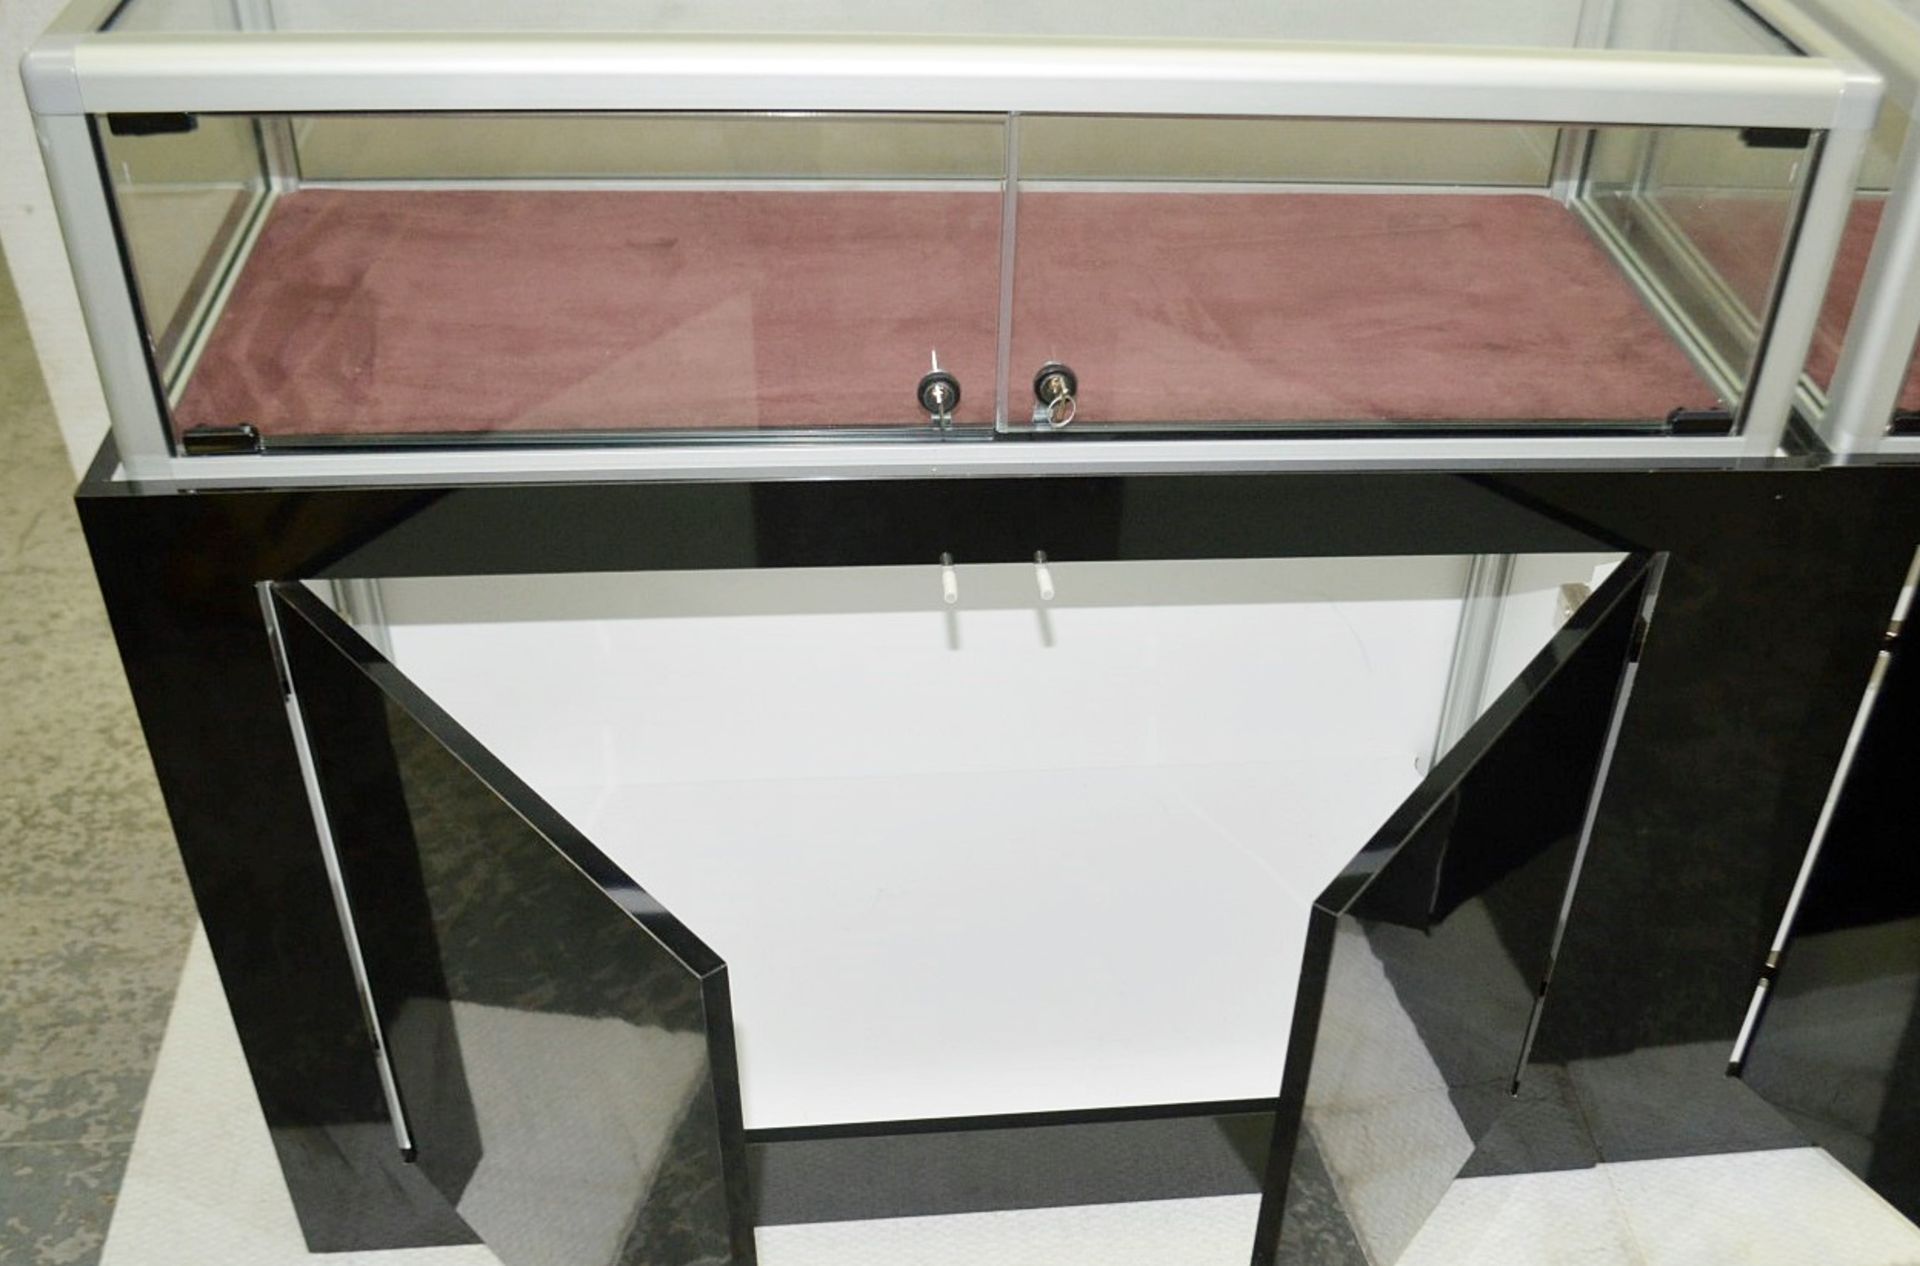 Pair Of Retail Counters With Lockable Display Cabinets And Undercounter Storage - Image 3 of 9